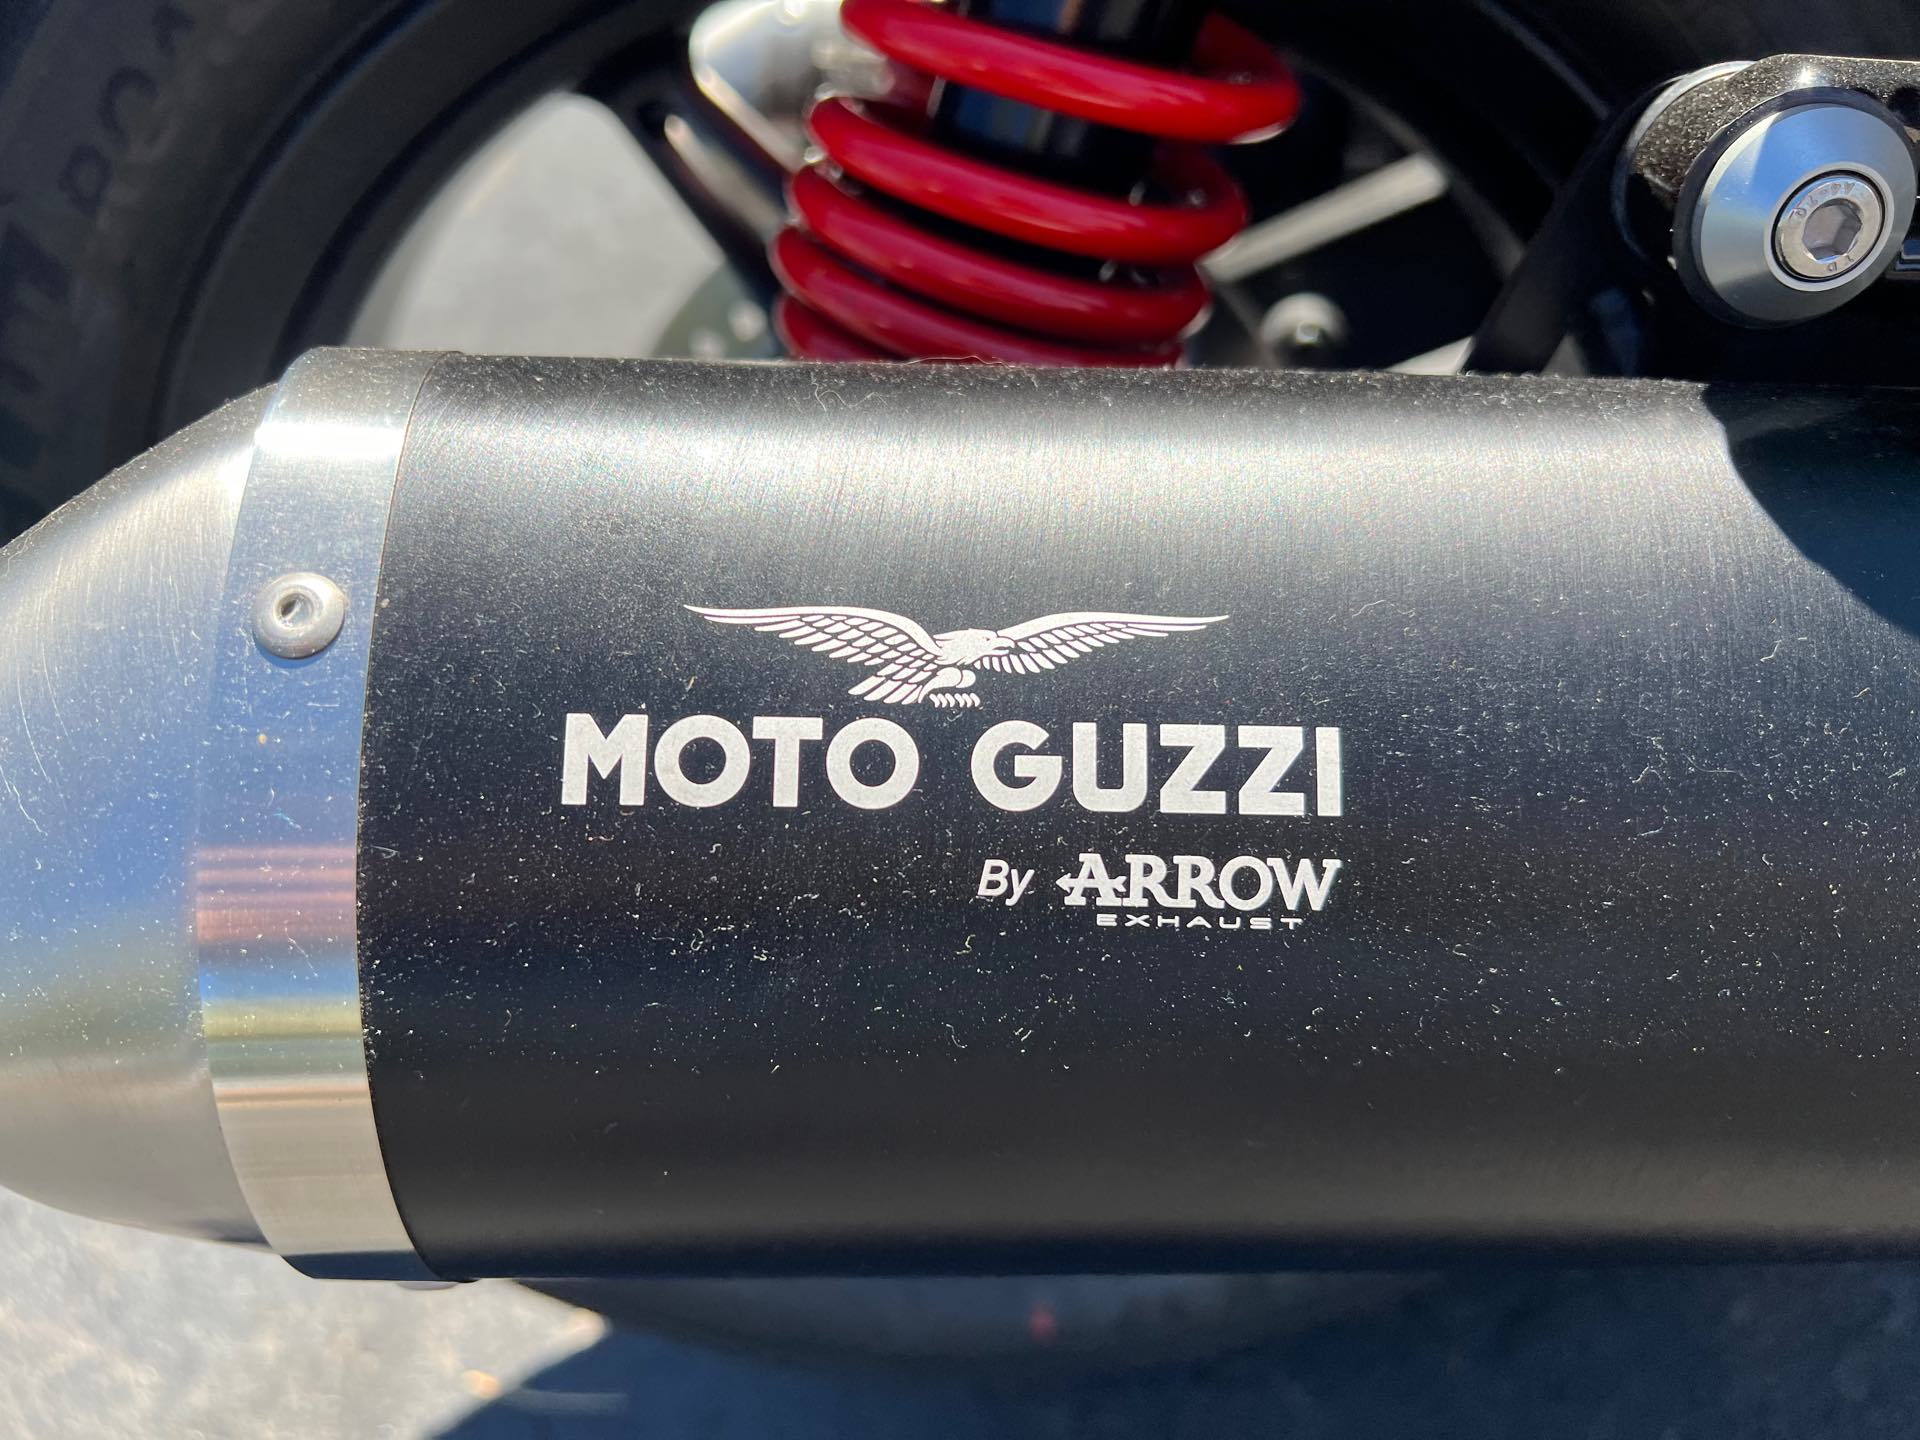 2023 Moto Guzzi V7 Special Edition at Aces Motorcycles - Fort Collins